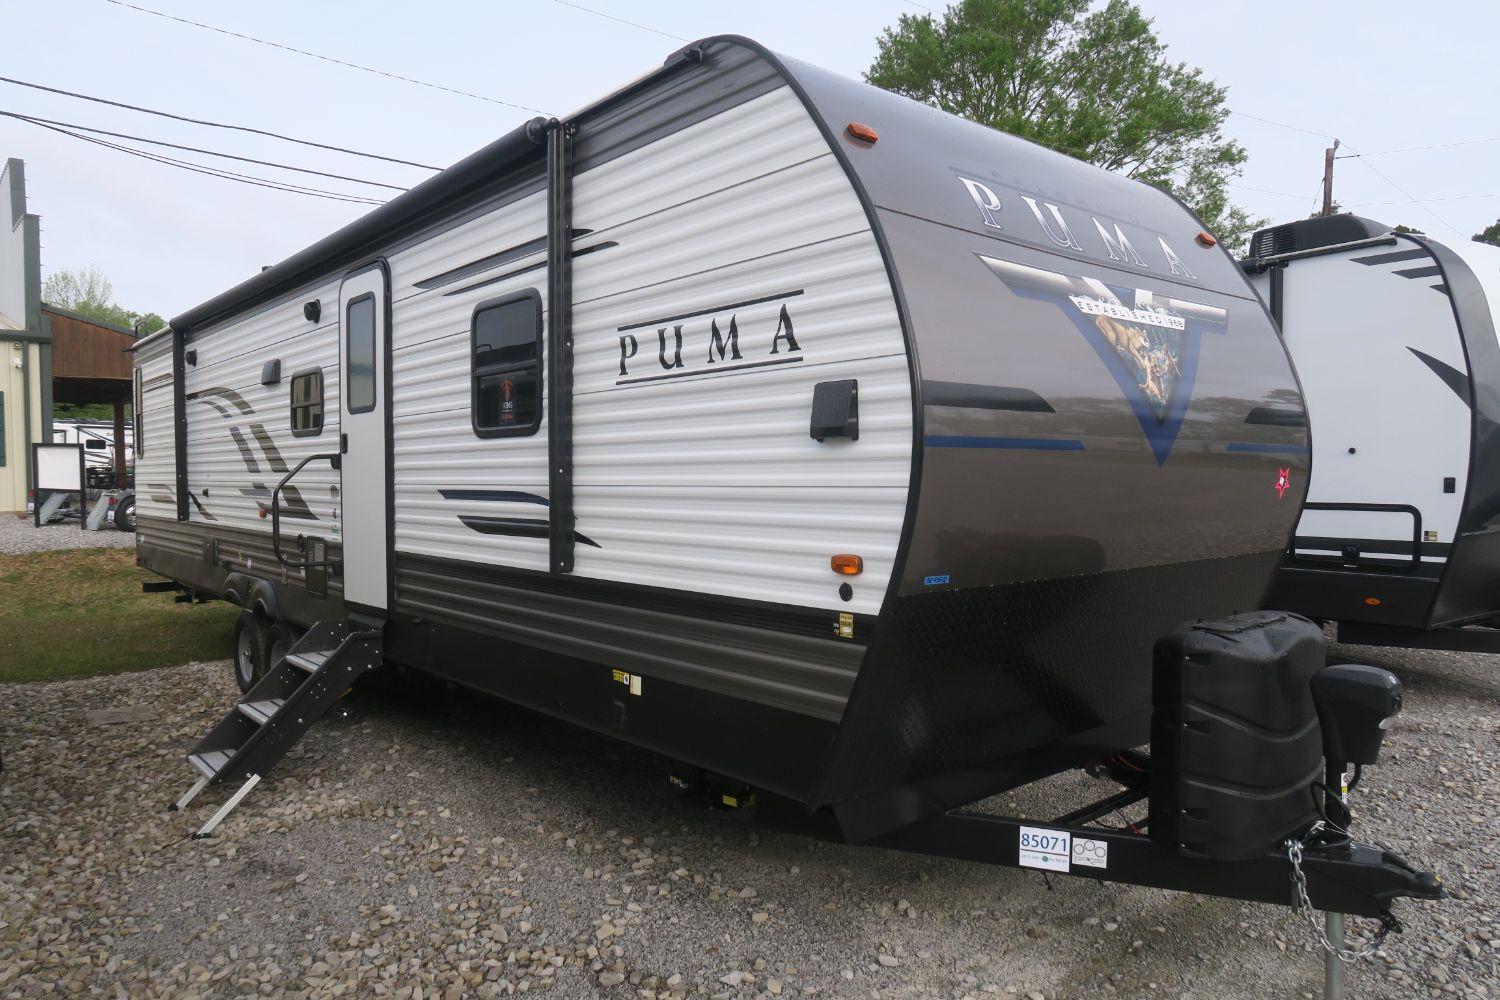 NEW 2020 PUMA 32RBFQ - Overview | Berryland Campers Puma Travel Trailer With Washer And Dryer